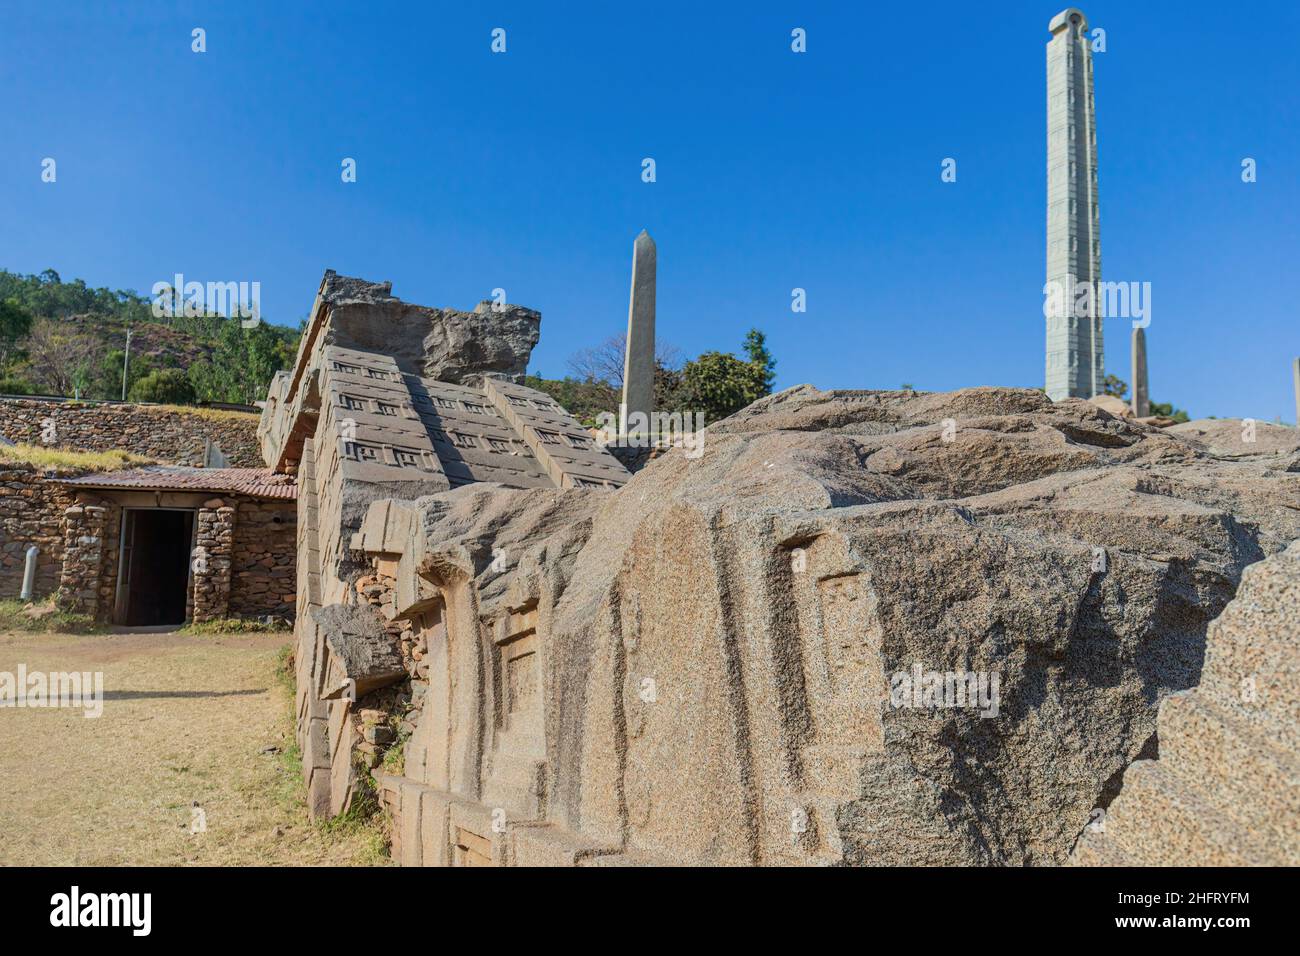 The ancient obelisks from Aksum, Ethiopia Stock Photo